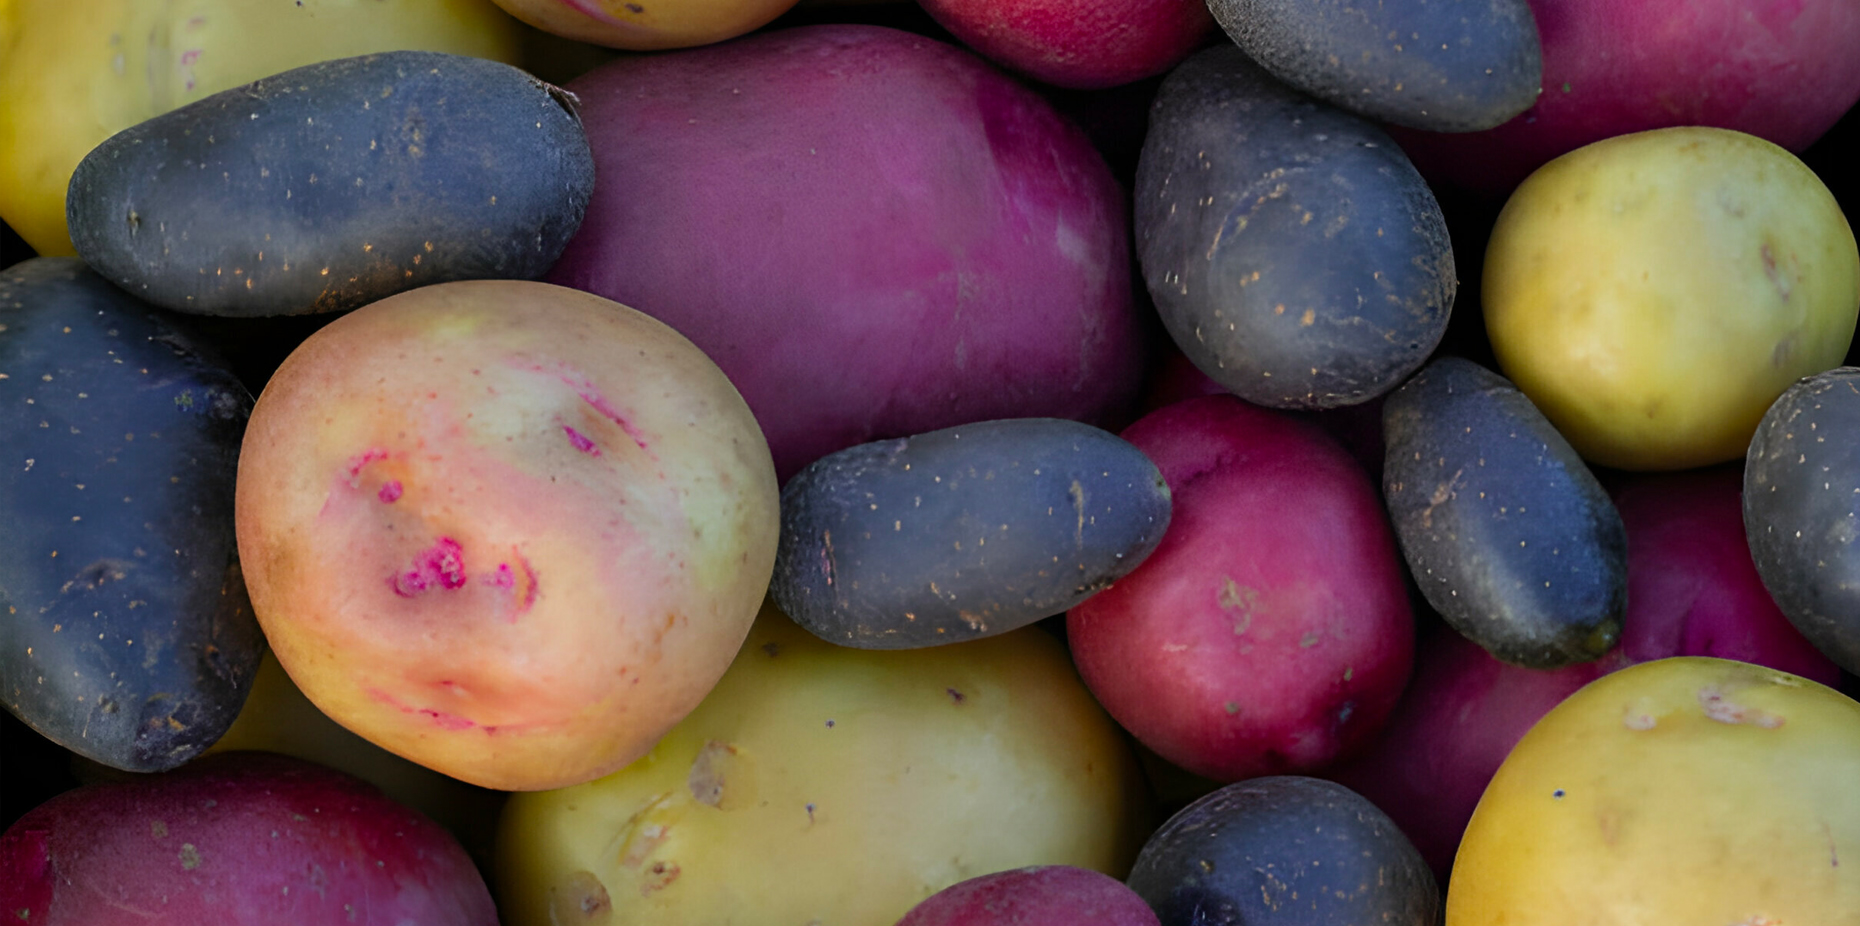 Potatoes: Facts, Nutrition, Benefits, & More